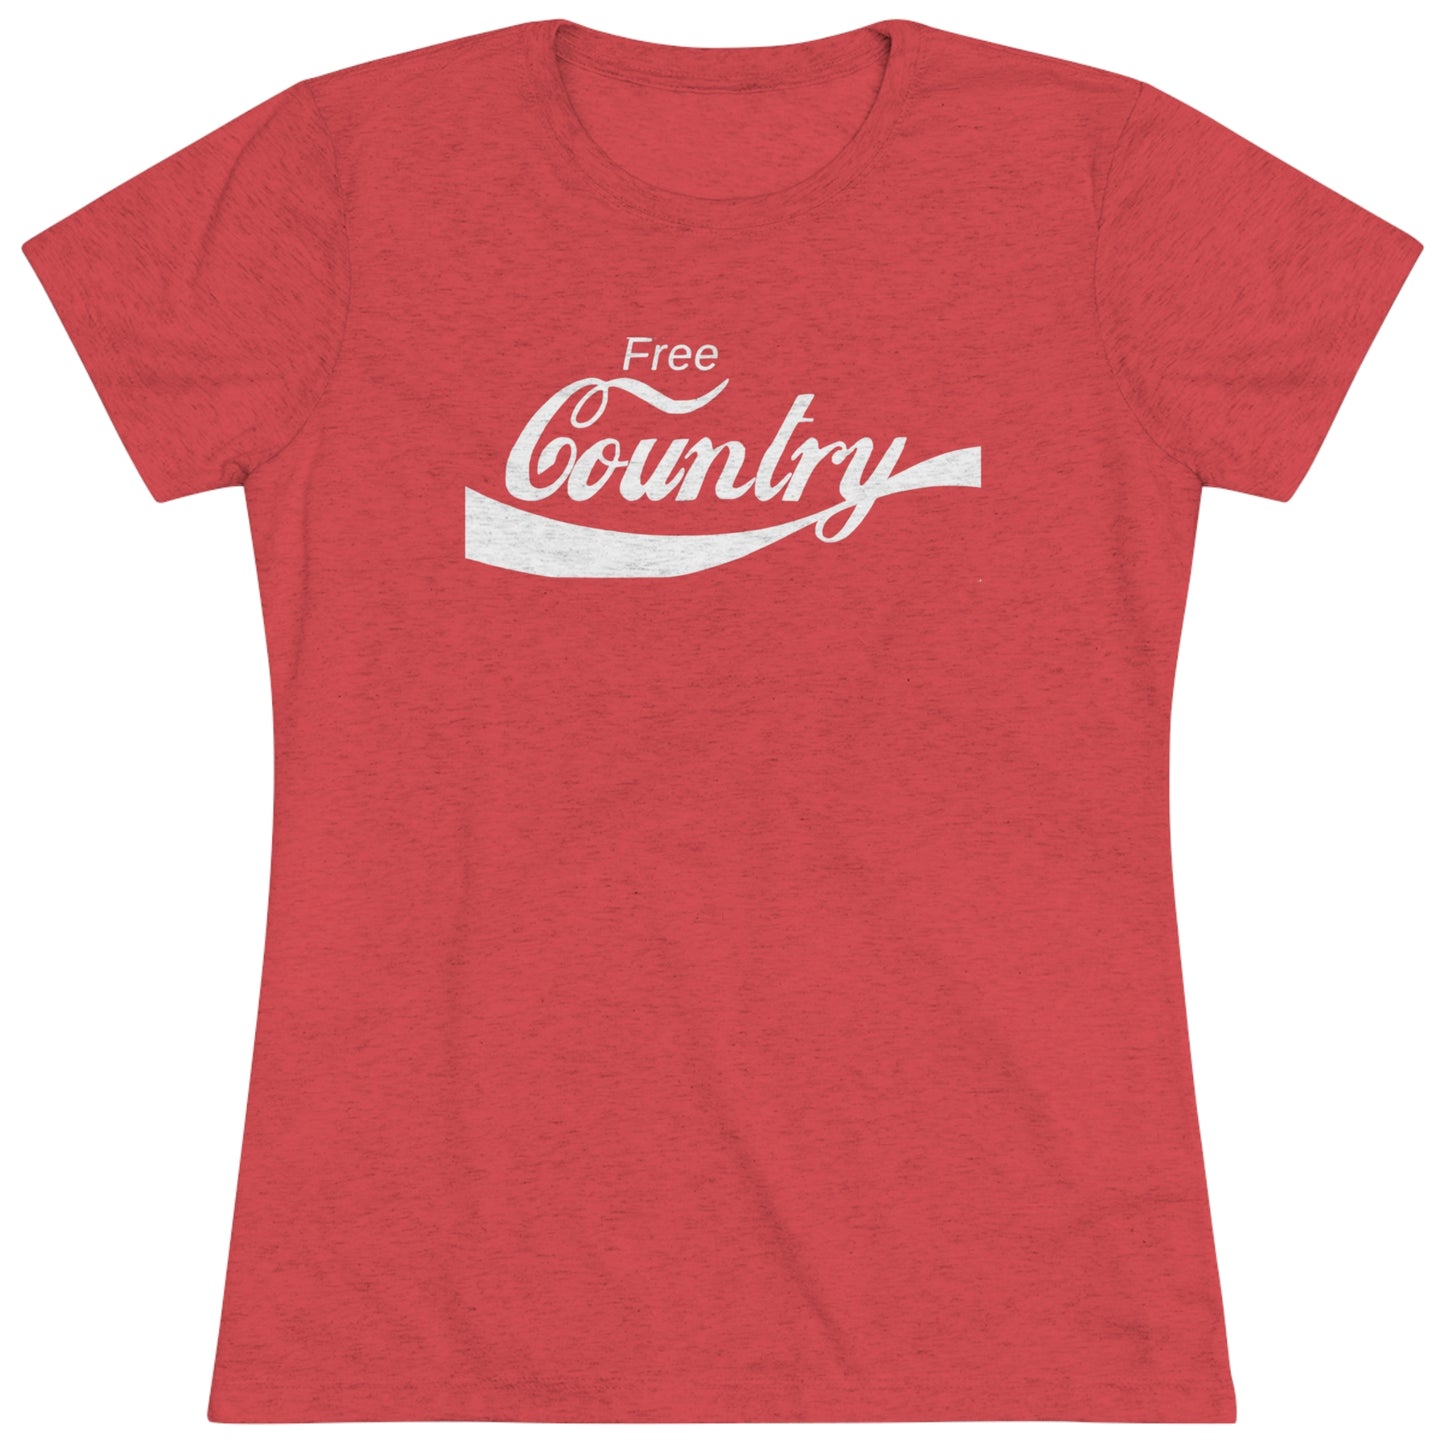 Free Country Red fitted T-Shirt